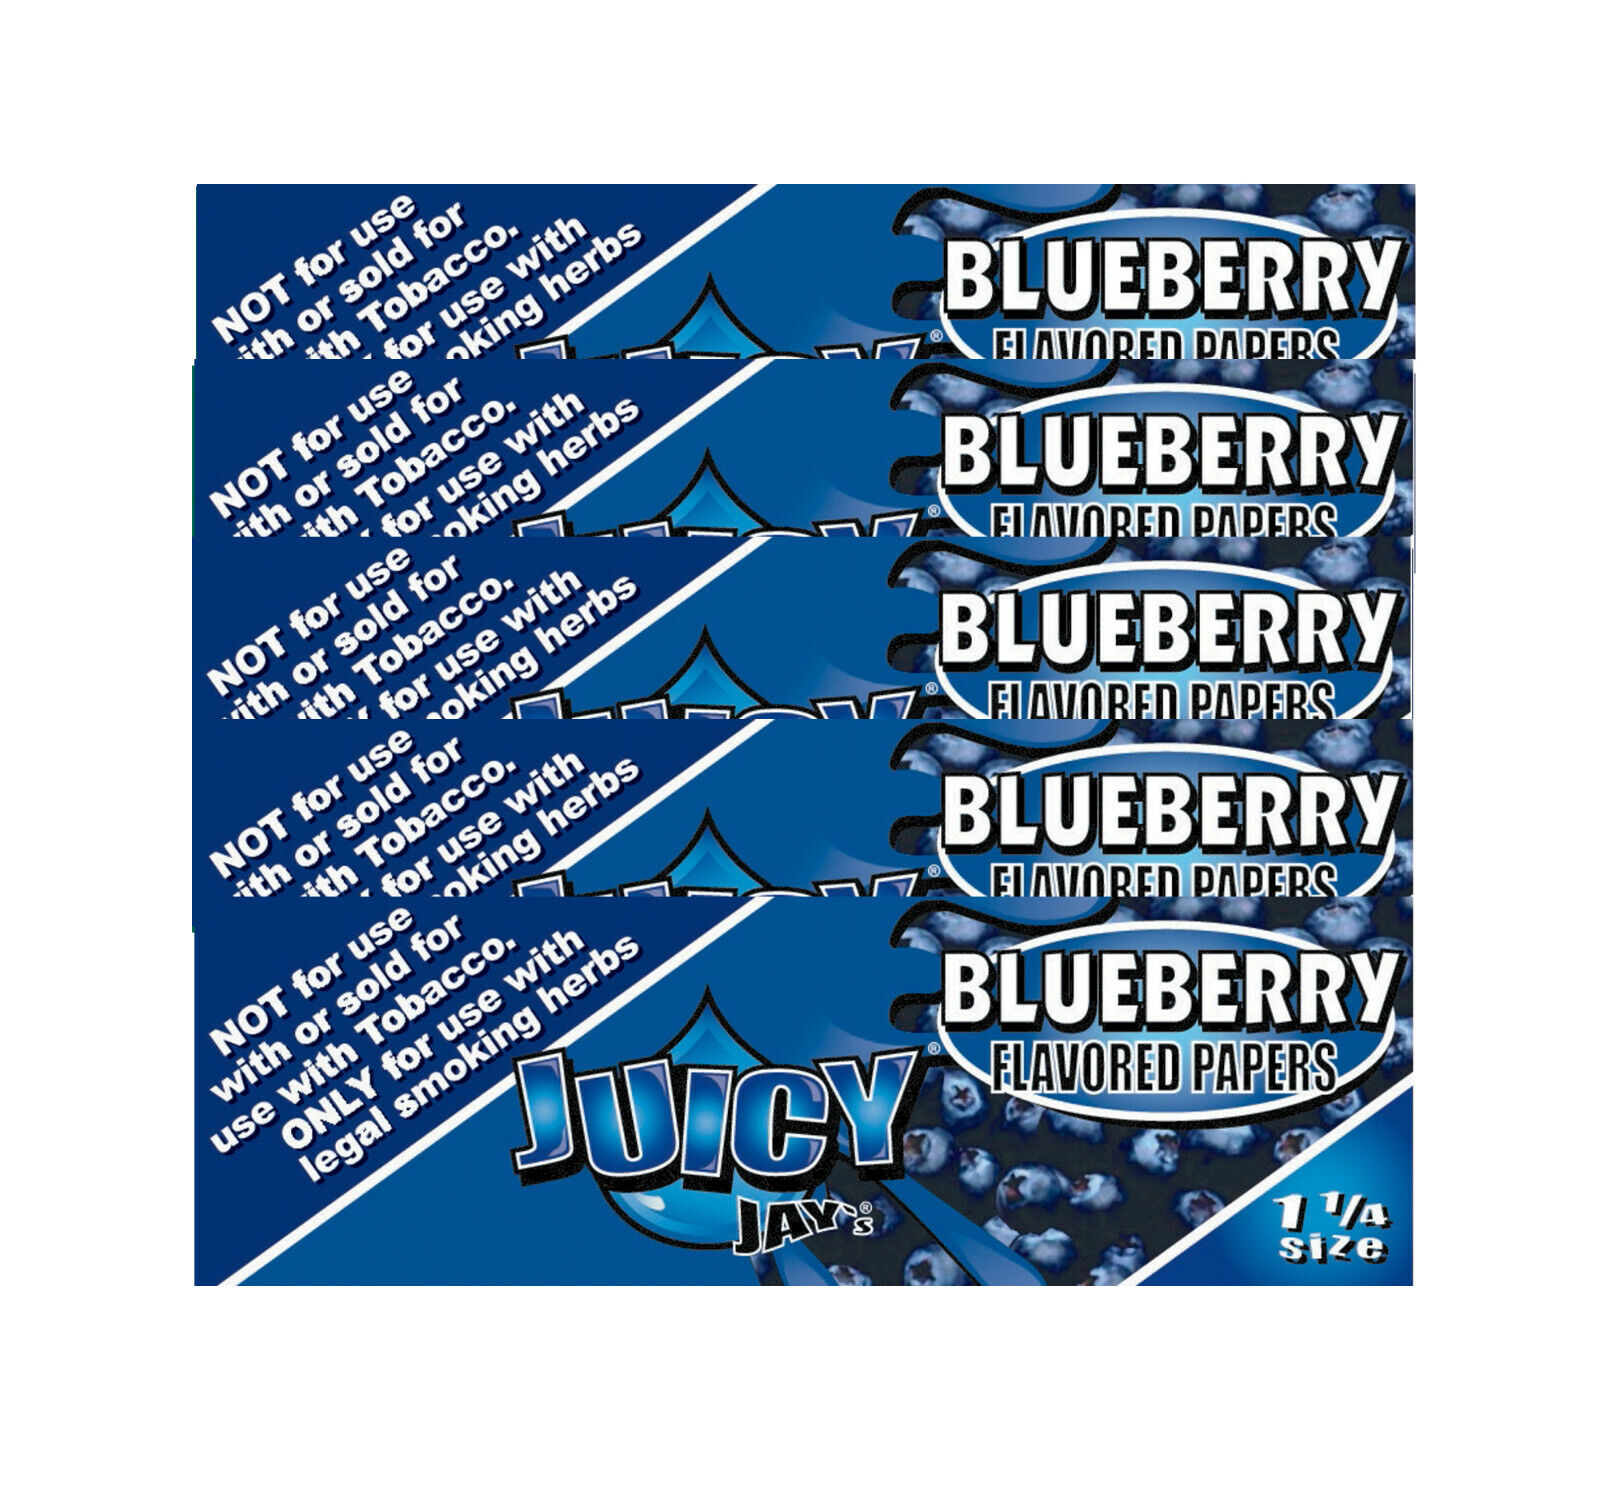 Juicy Jay's Blueberry Rolling Papers 1.25 5 Packs